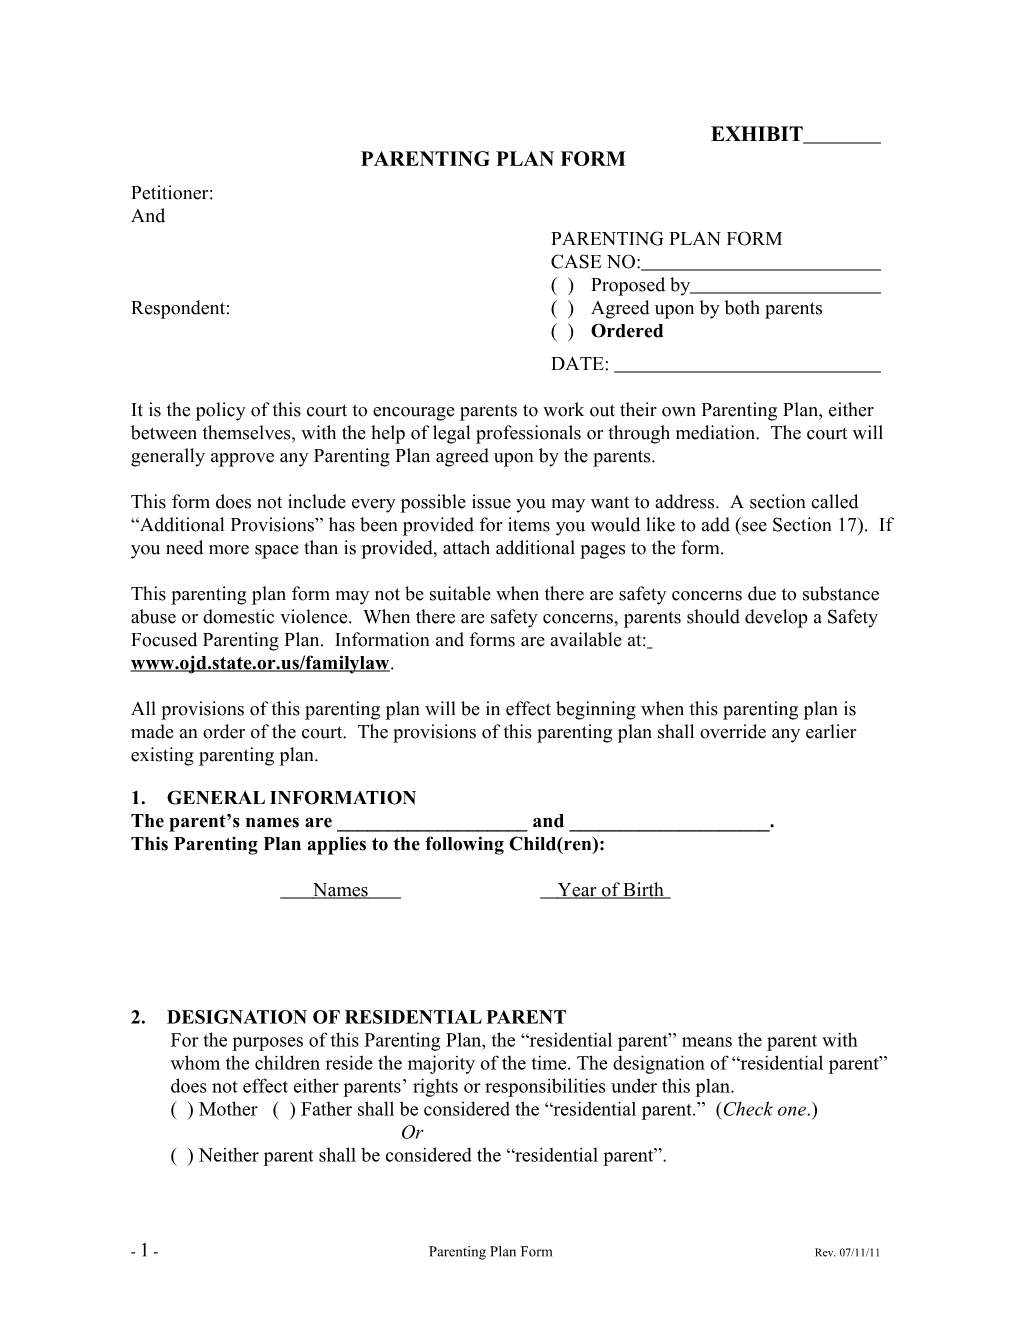 And PARENTING PLAN FORM